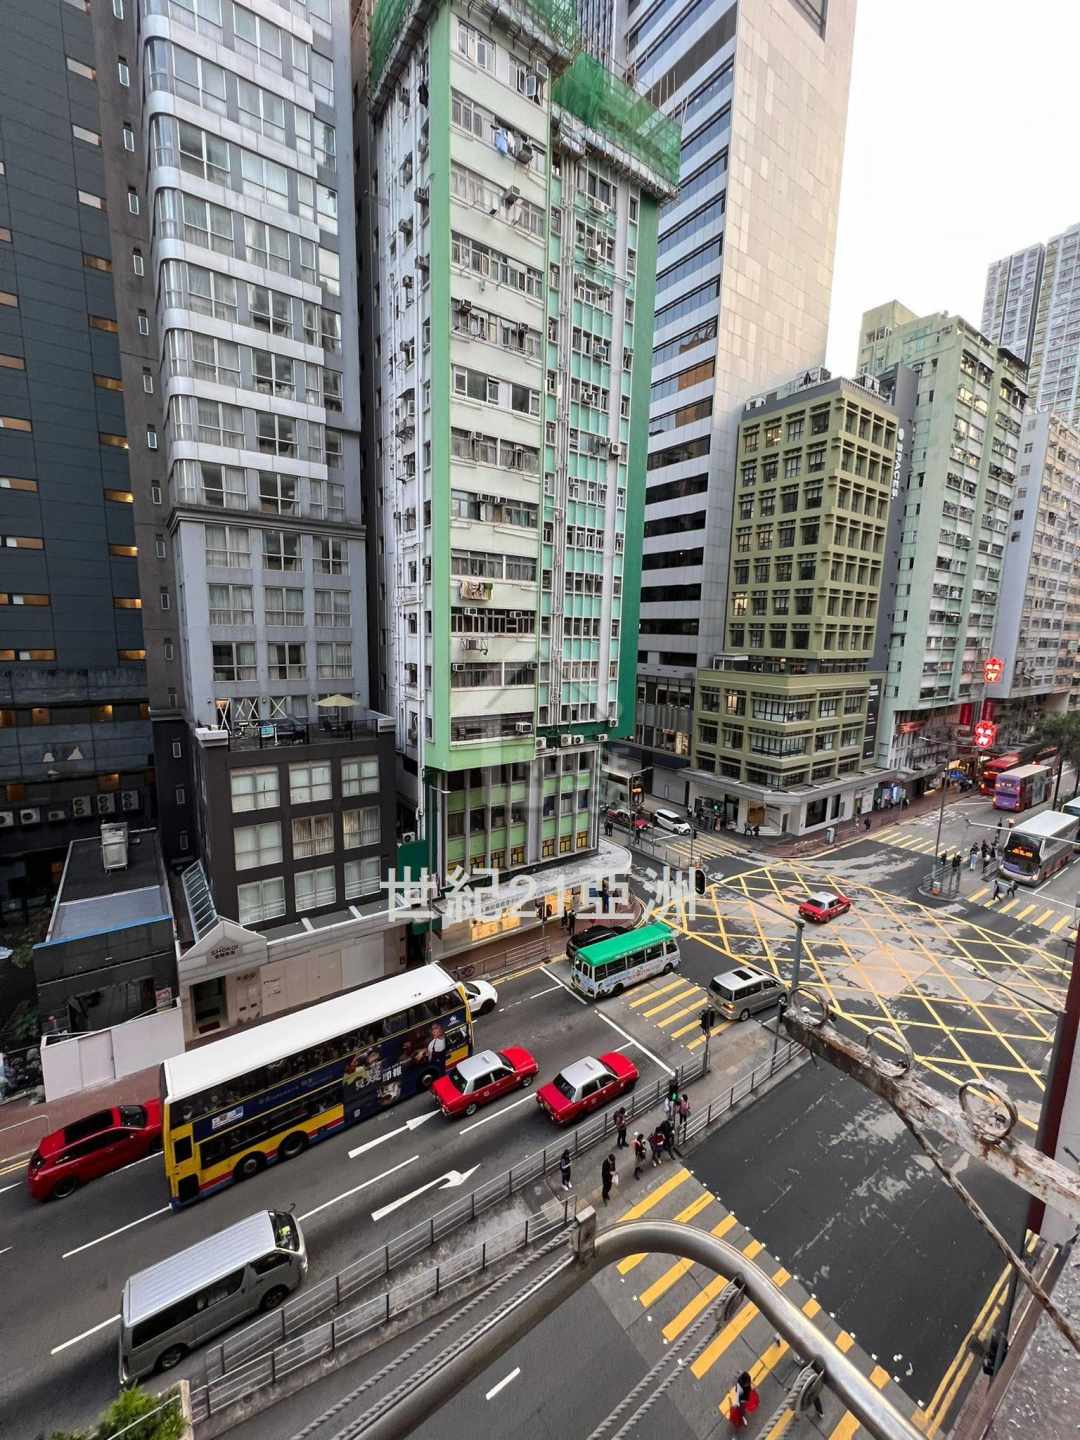 Wan Chai HENNESSY ROAD COURT Lower Floor View from Living Room House730-5925902